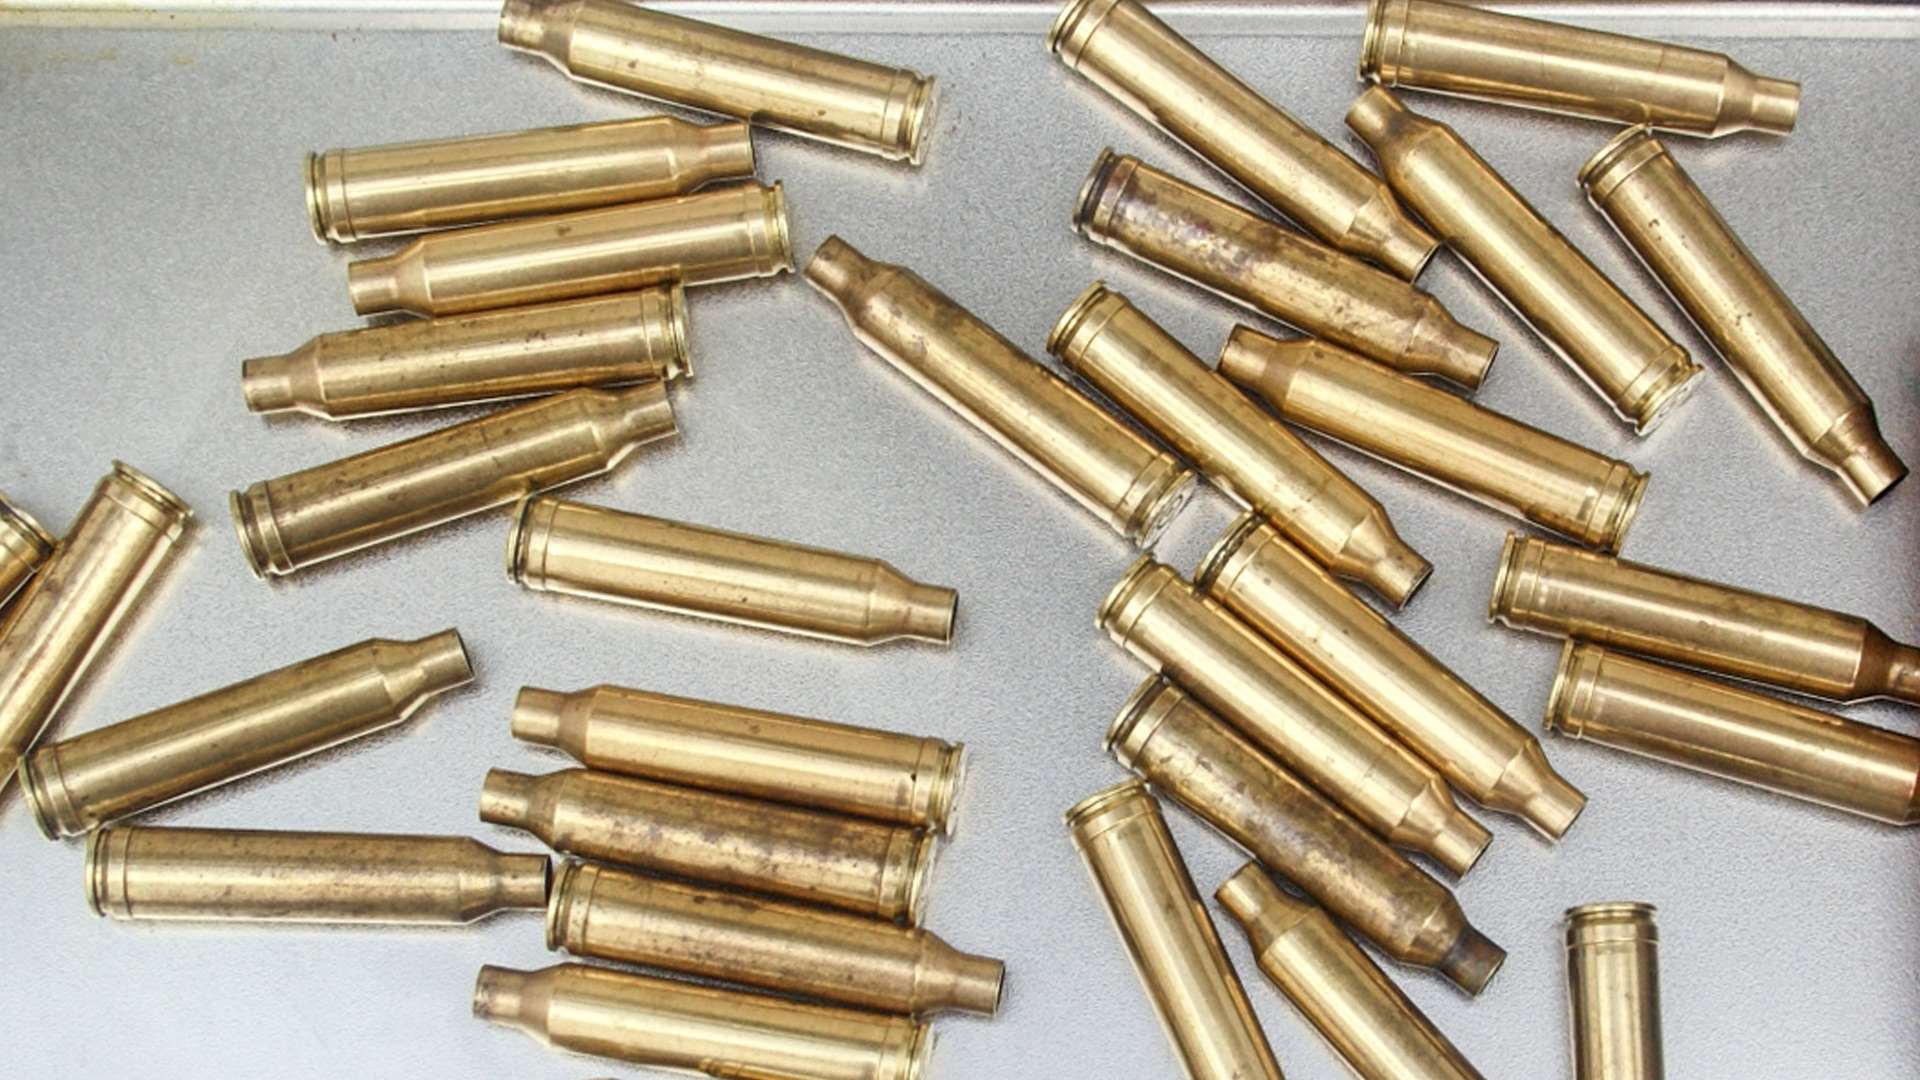 Reloading On A Budget Part 1: Brass Preparation